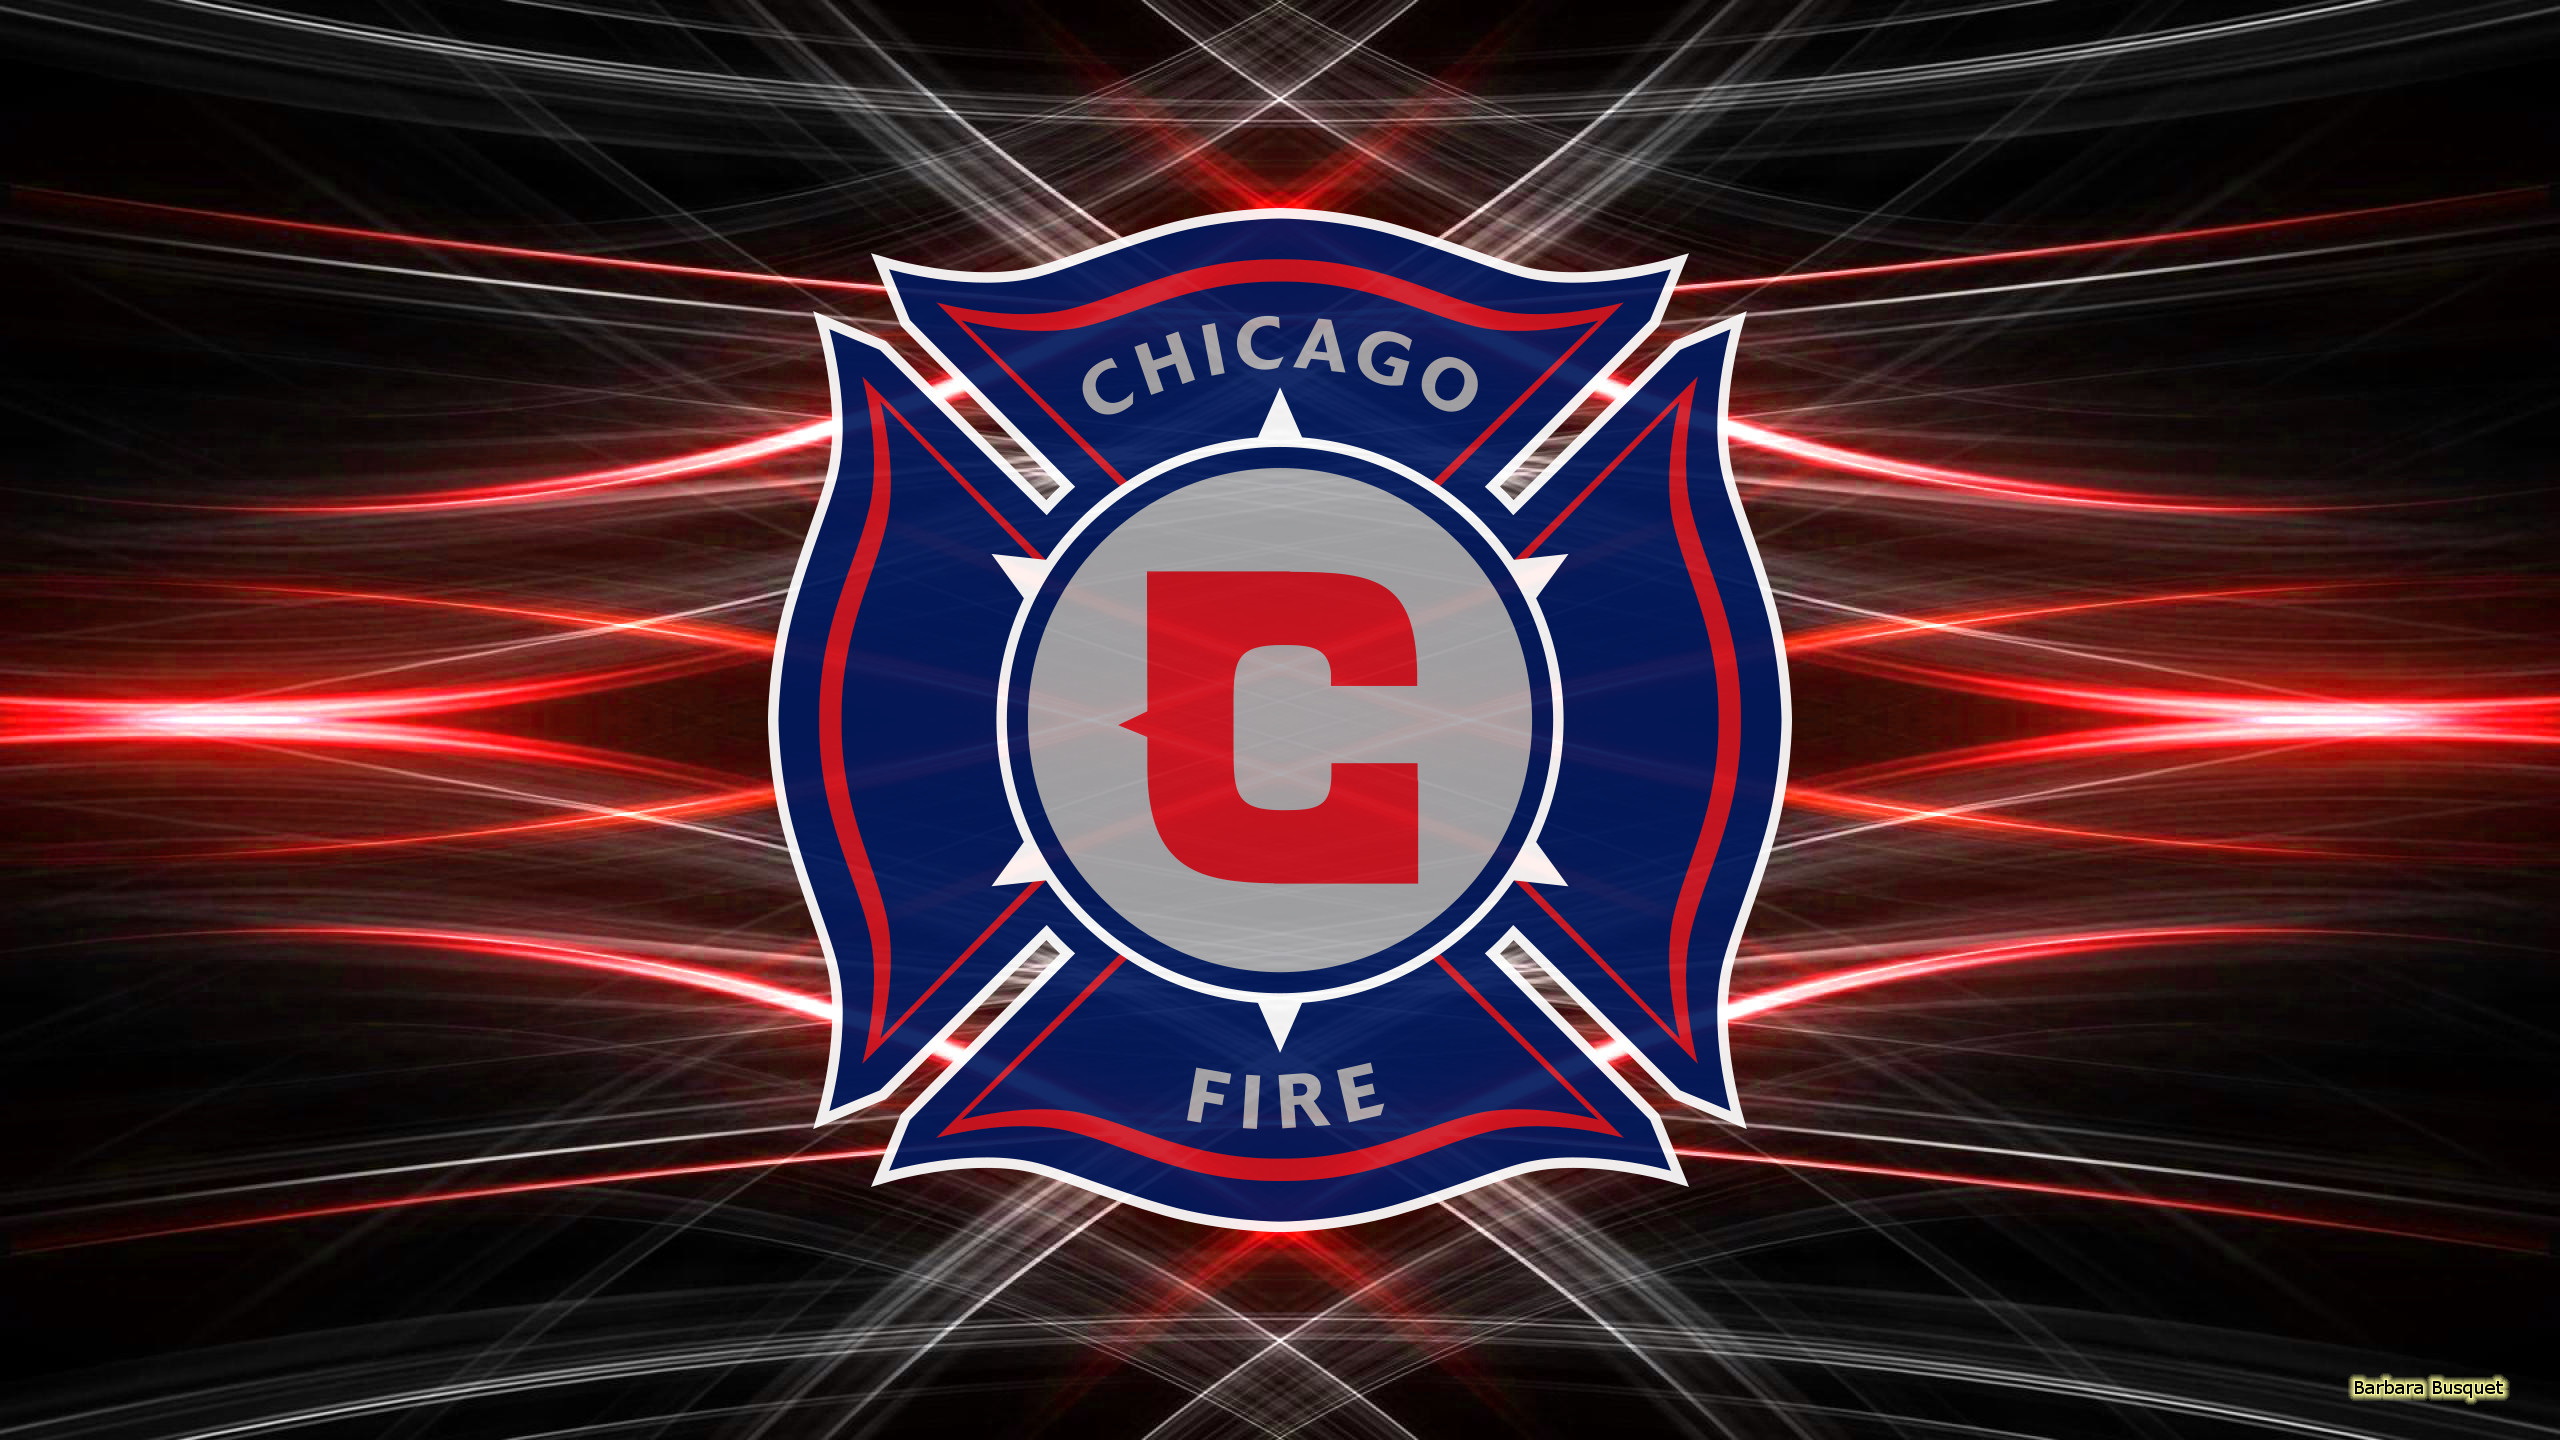 Chicago Fire Soccer Club Wallpaper Image